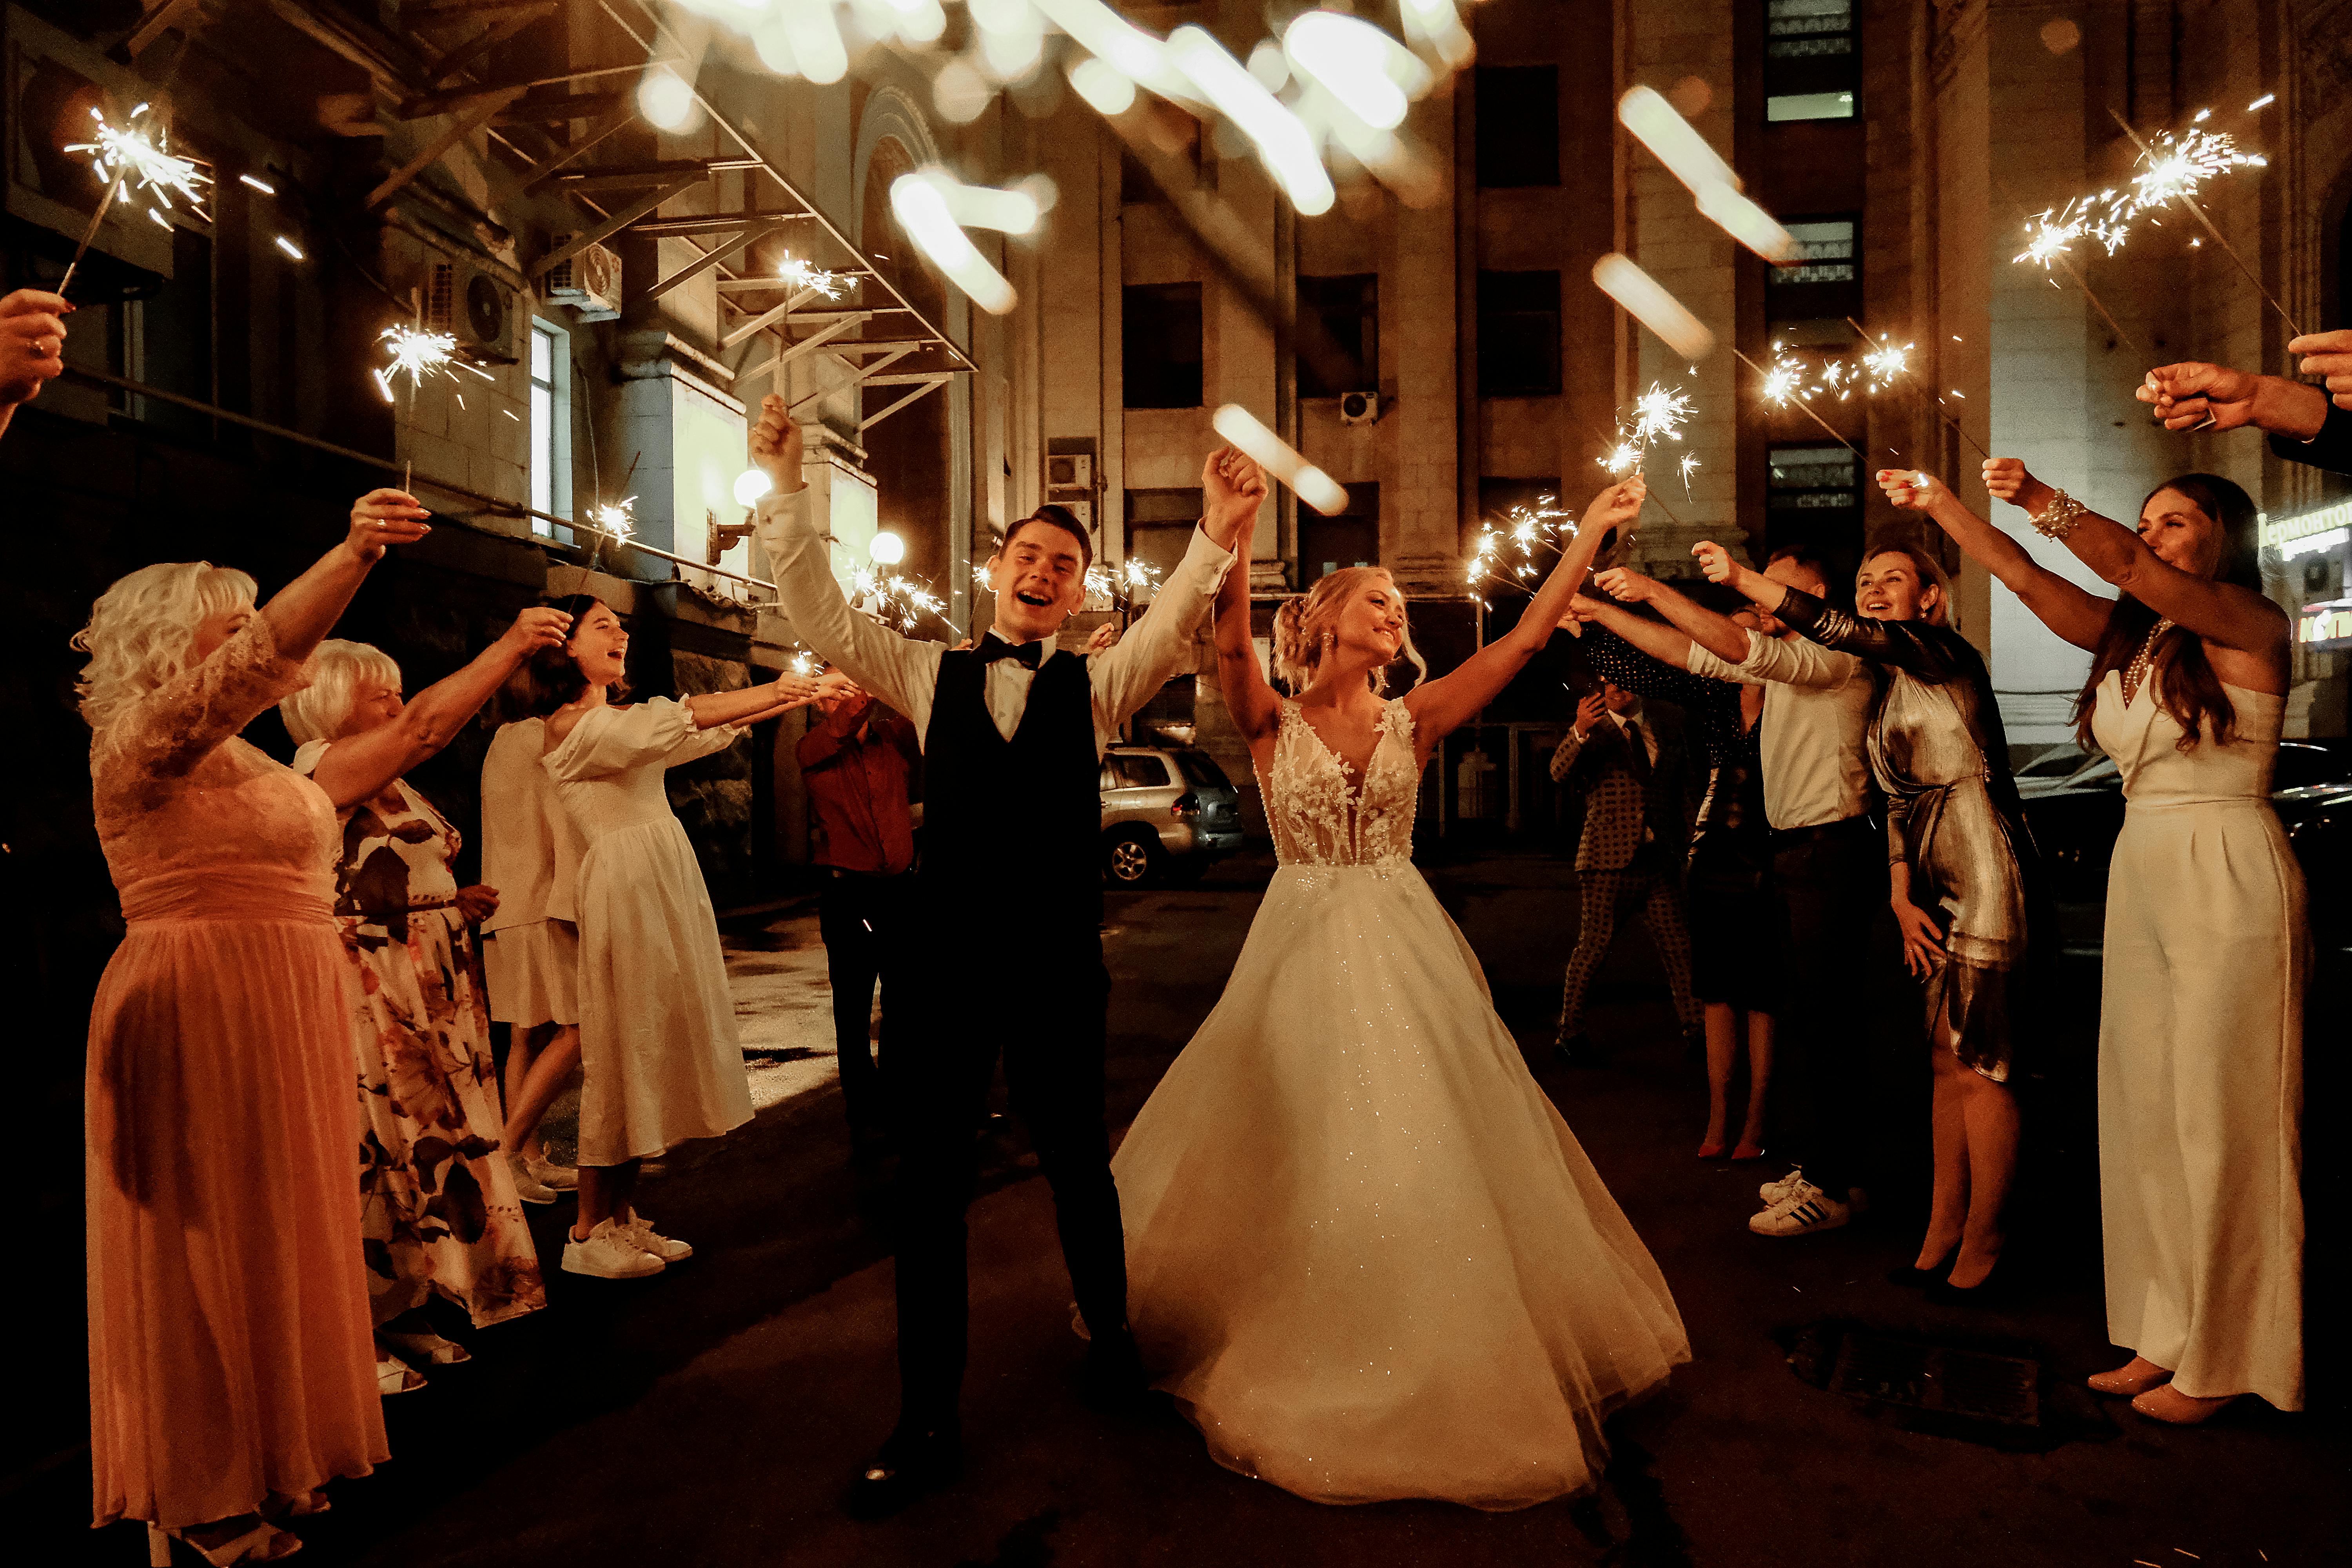 Guests and newlywed couple celebrating wedding at night  | Source: Pexels